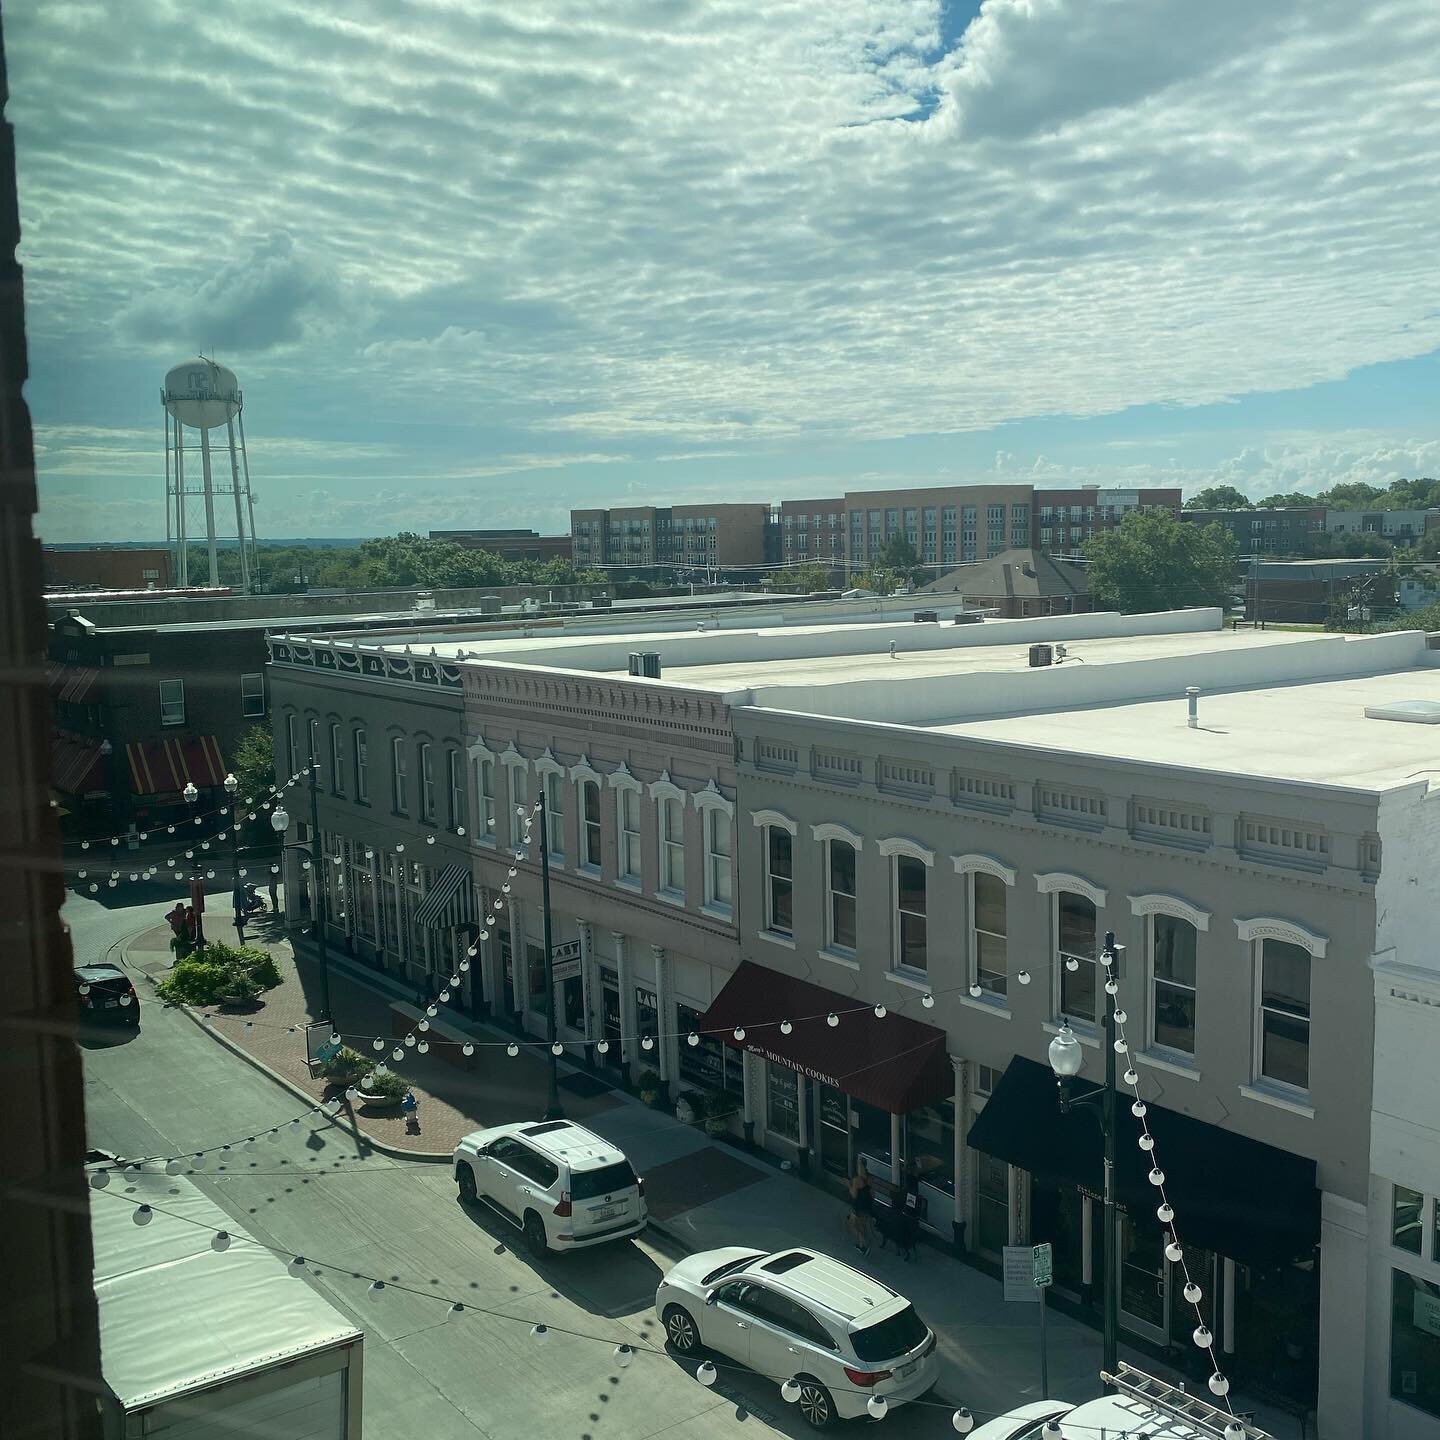 Can&rsquo;t beat this view!
Our presidential suite overlocks the unique shops in @downtownmckinney!

Book a stay with us and stroll through the Historic District.